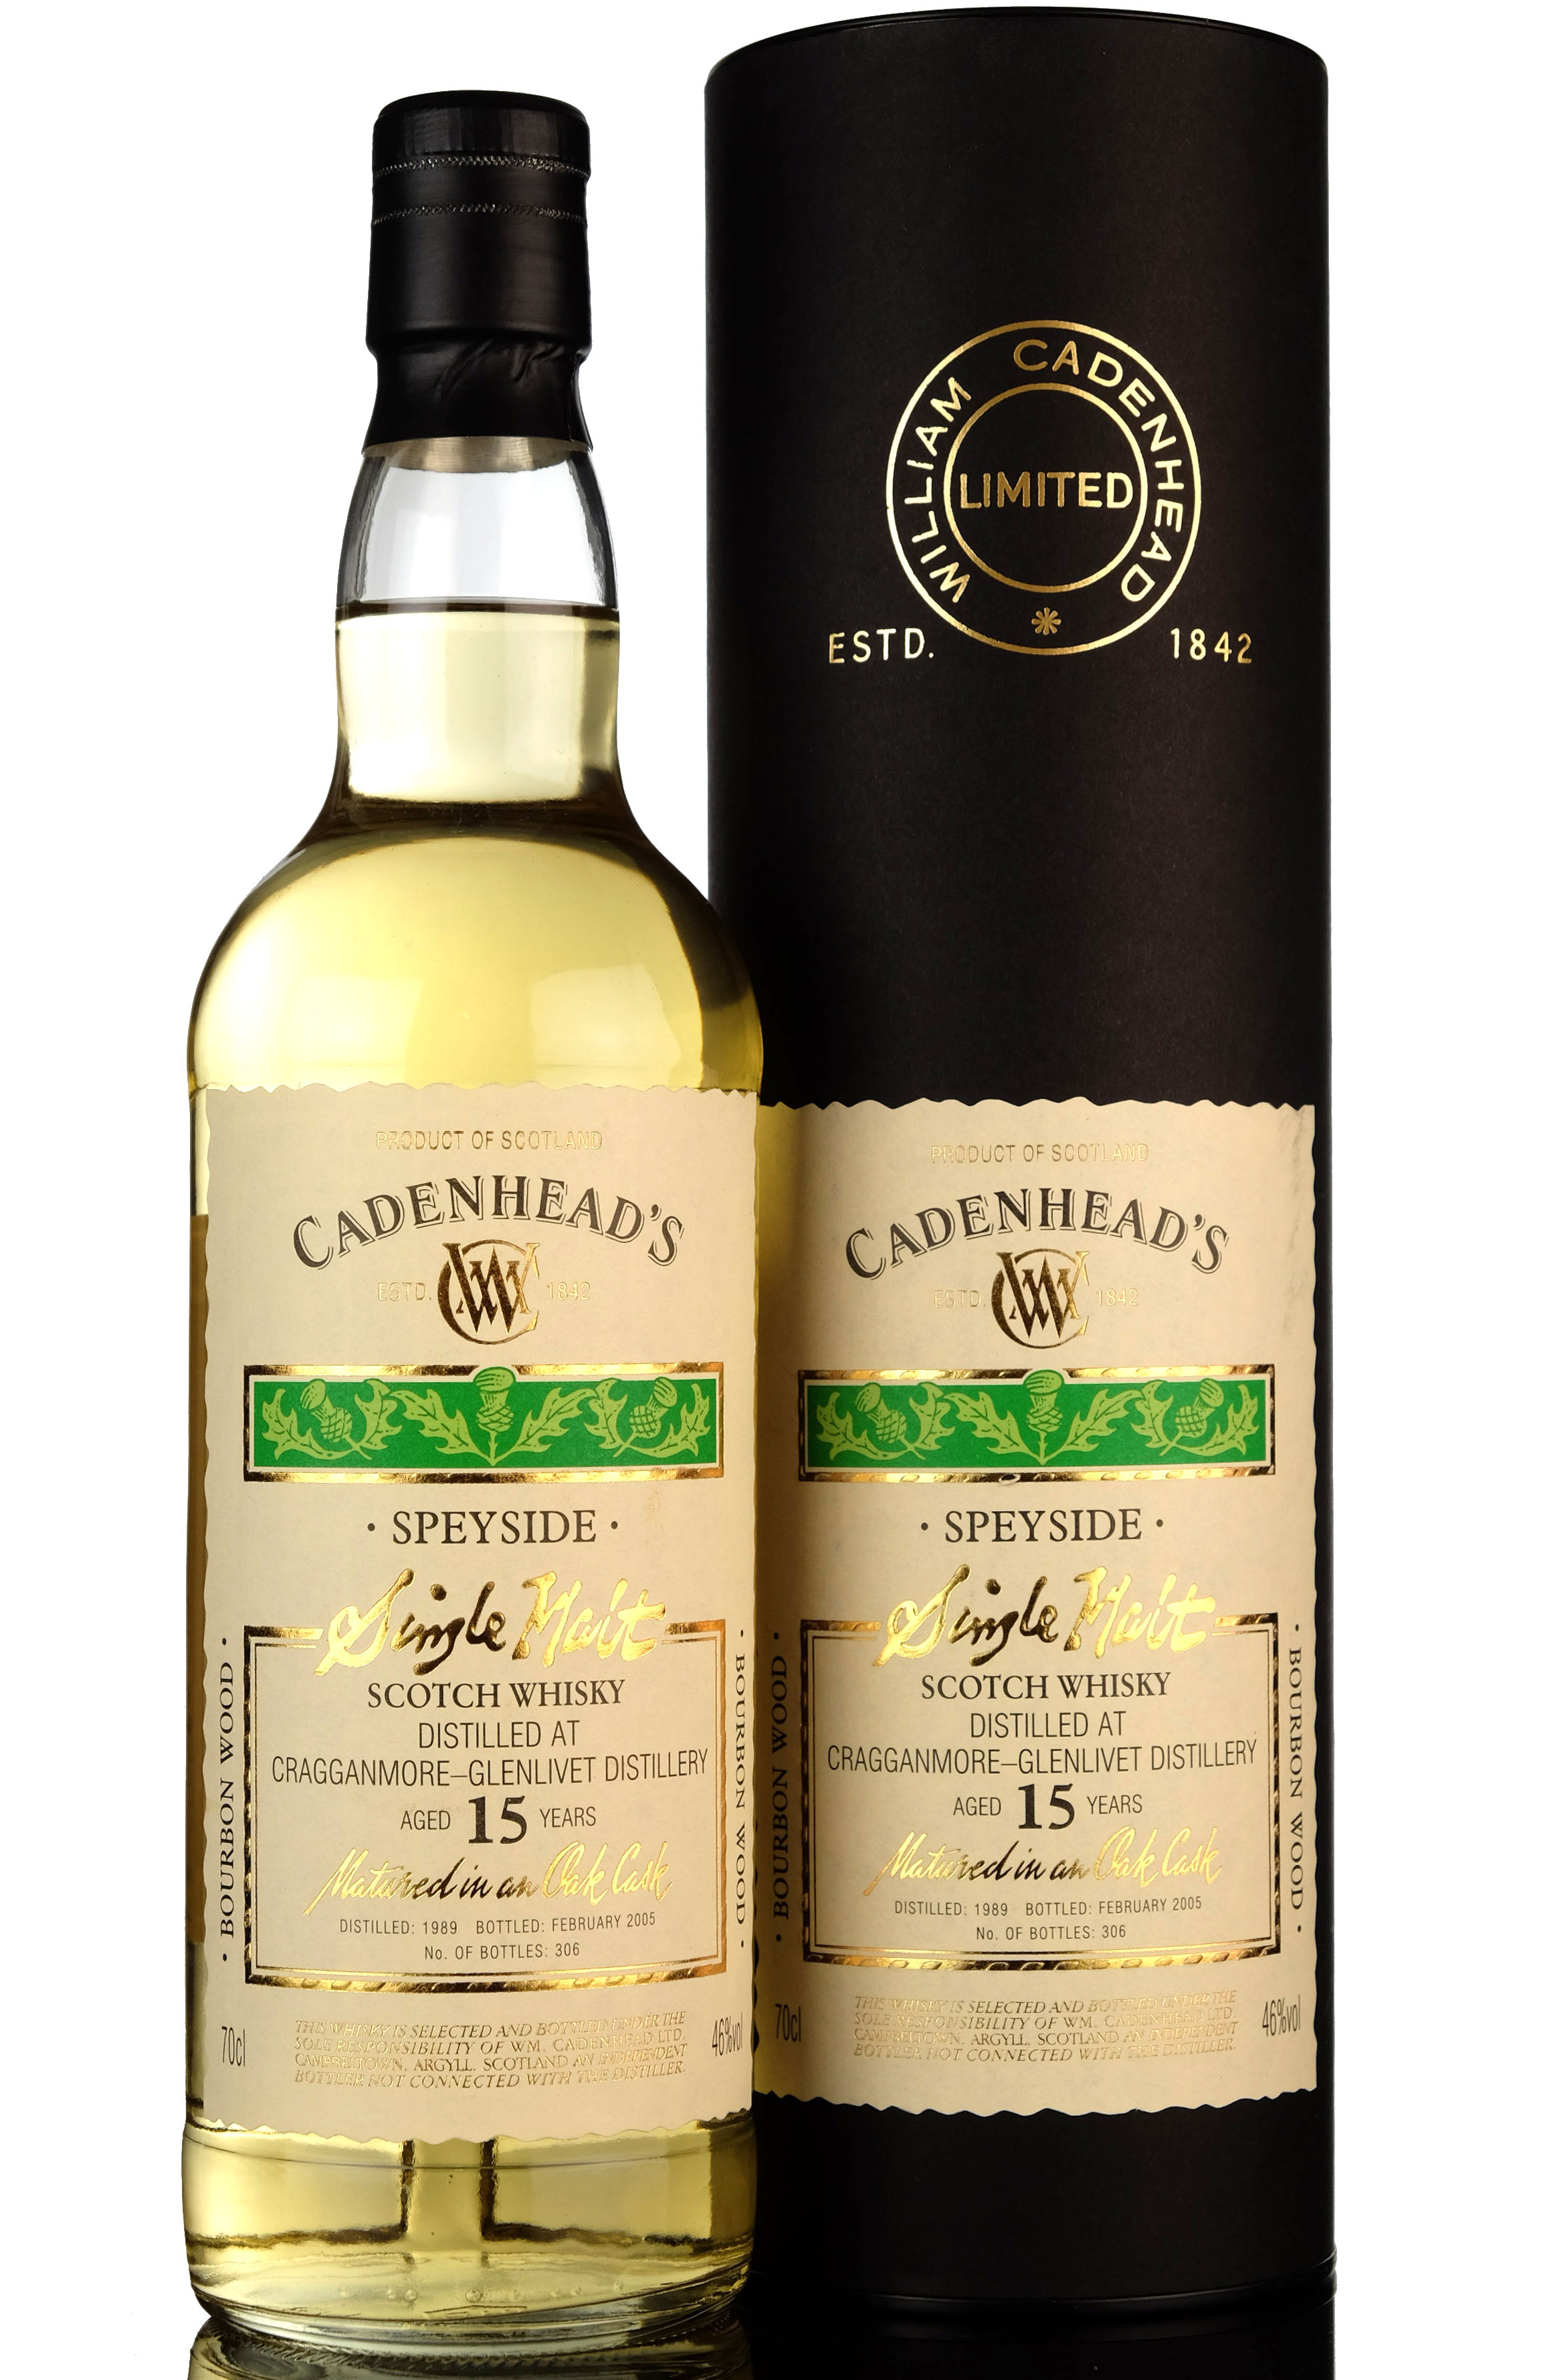 Cragganmore-Glenlivet 1989-2005 - 15 Year Old - Cadenheads Authentic Collection